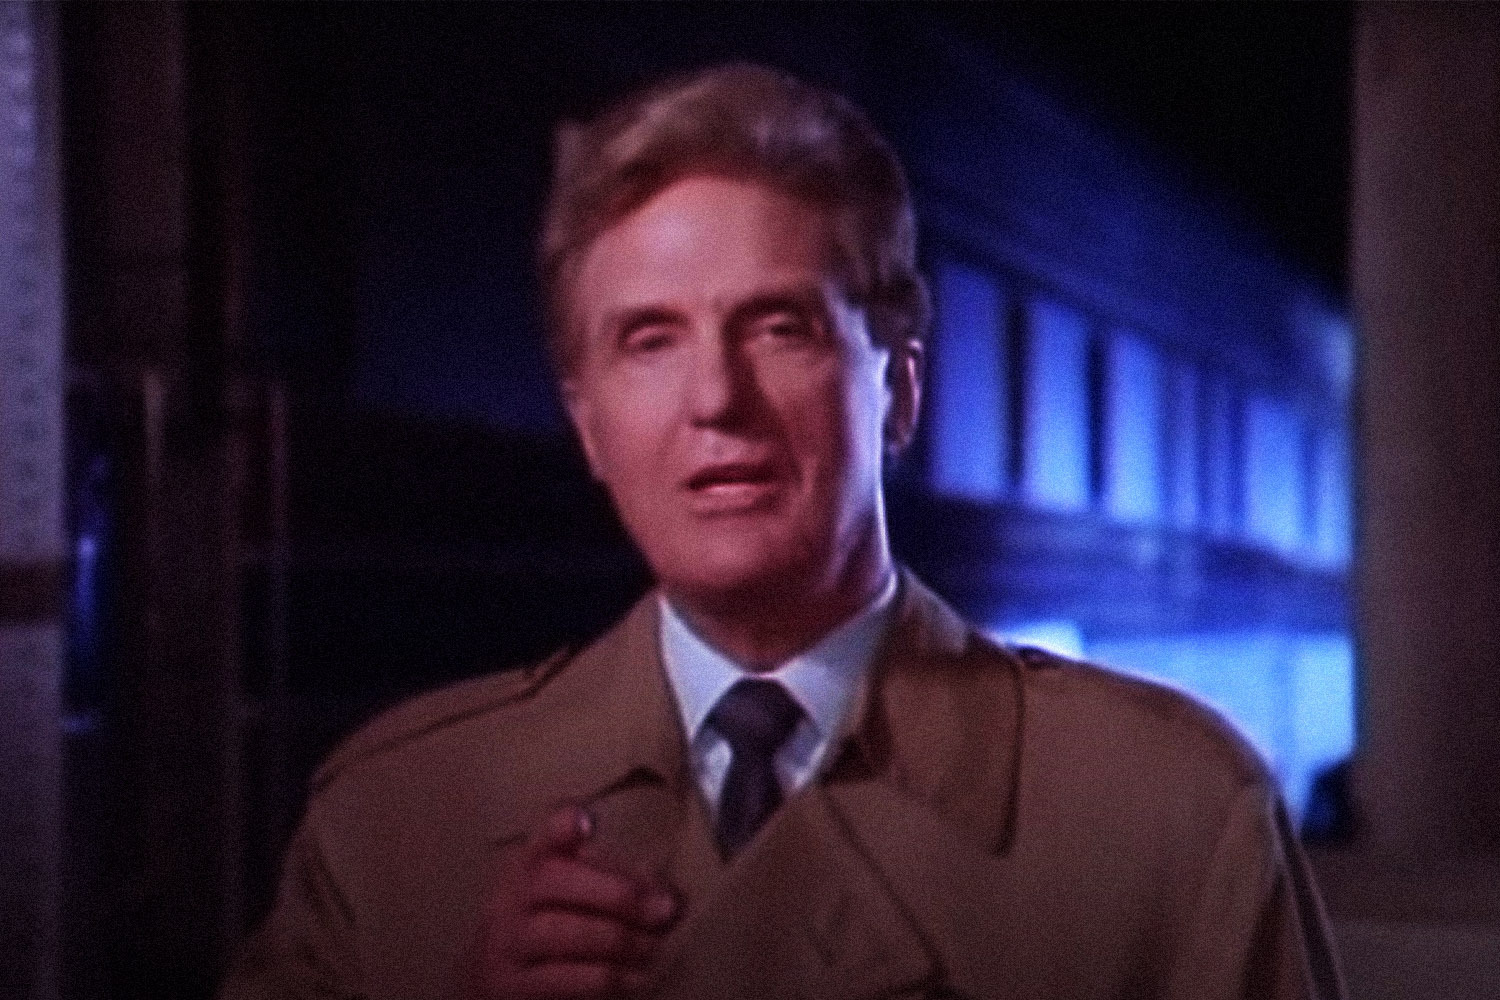 will robert stack unsolved mysteries be on netflix